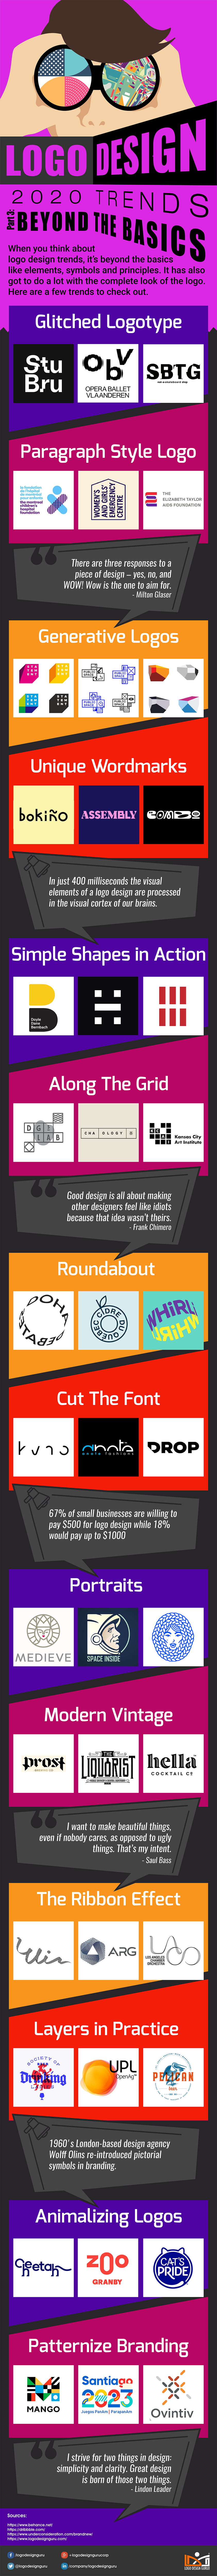 Infographic Take A Tour Of The Top Logo Trends For Creative Bloq